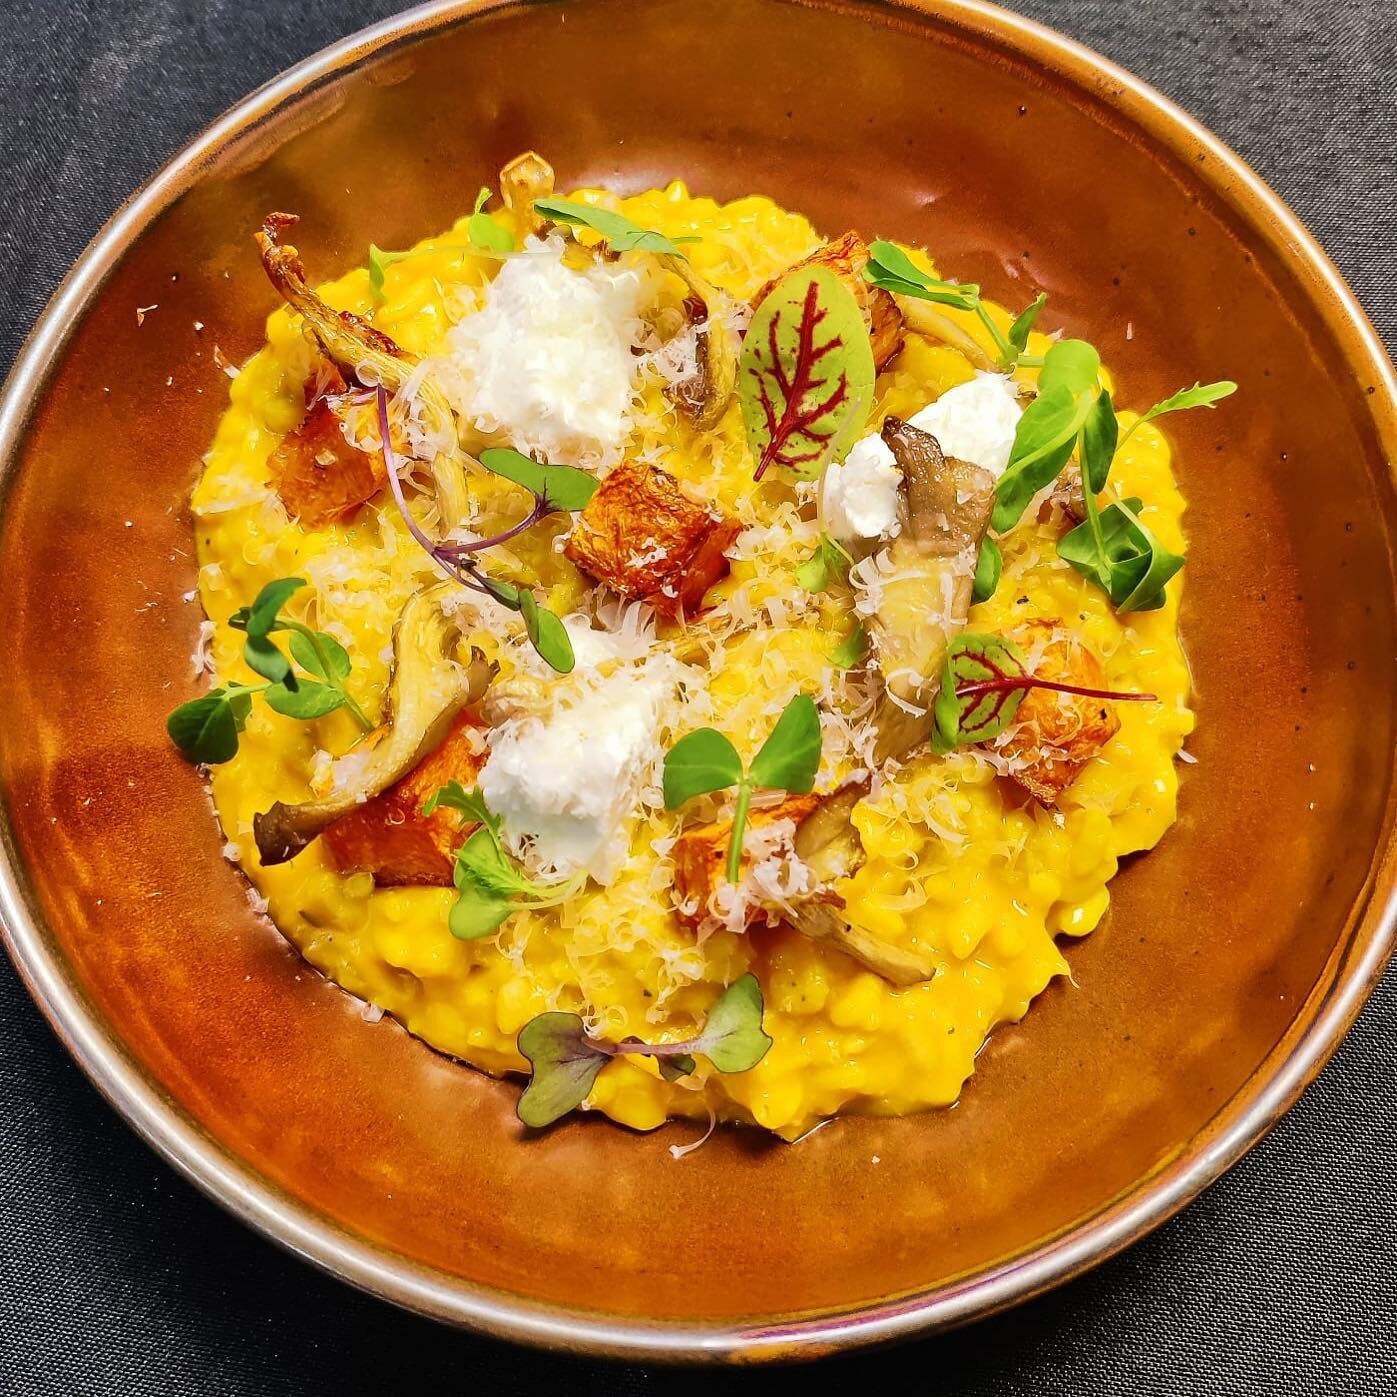 Our pumpkin risotto is a firm favourite on our new festive menu, served with wild mushrooms, roasted pumpkin, feta &amp; parmesan 🤤 

The new menu features traditional classics such as roast turkey, classic cod and stunning venison dishes such as; t